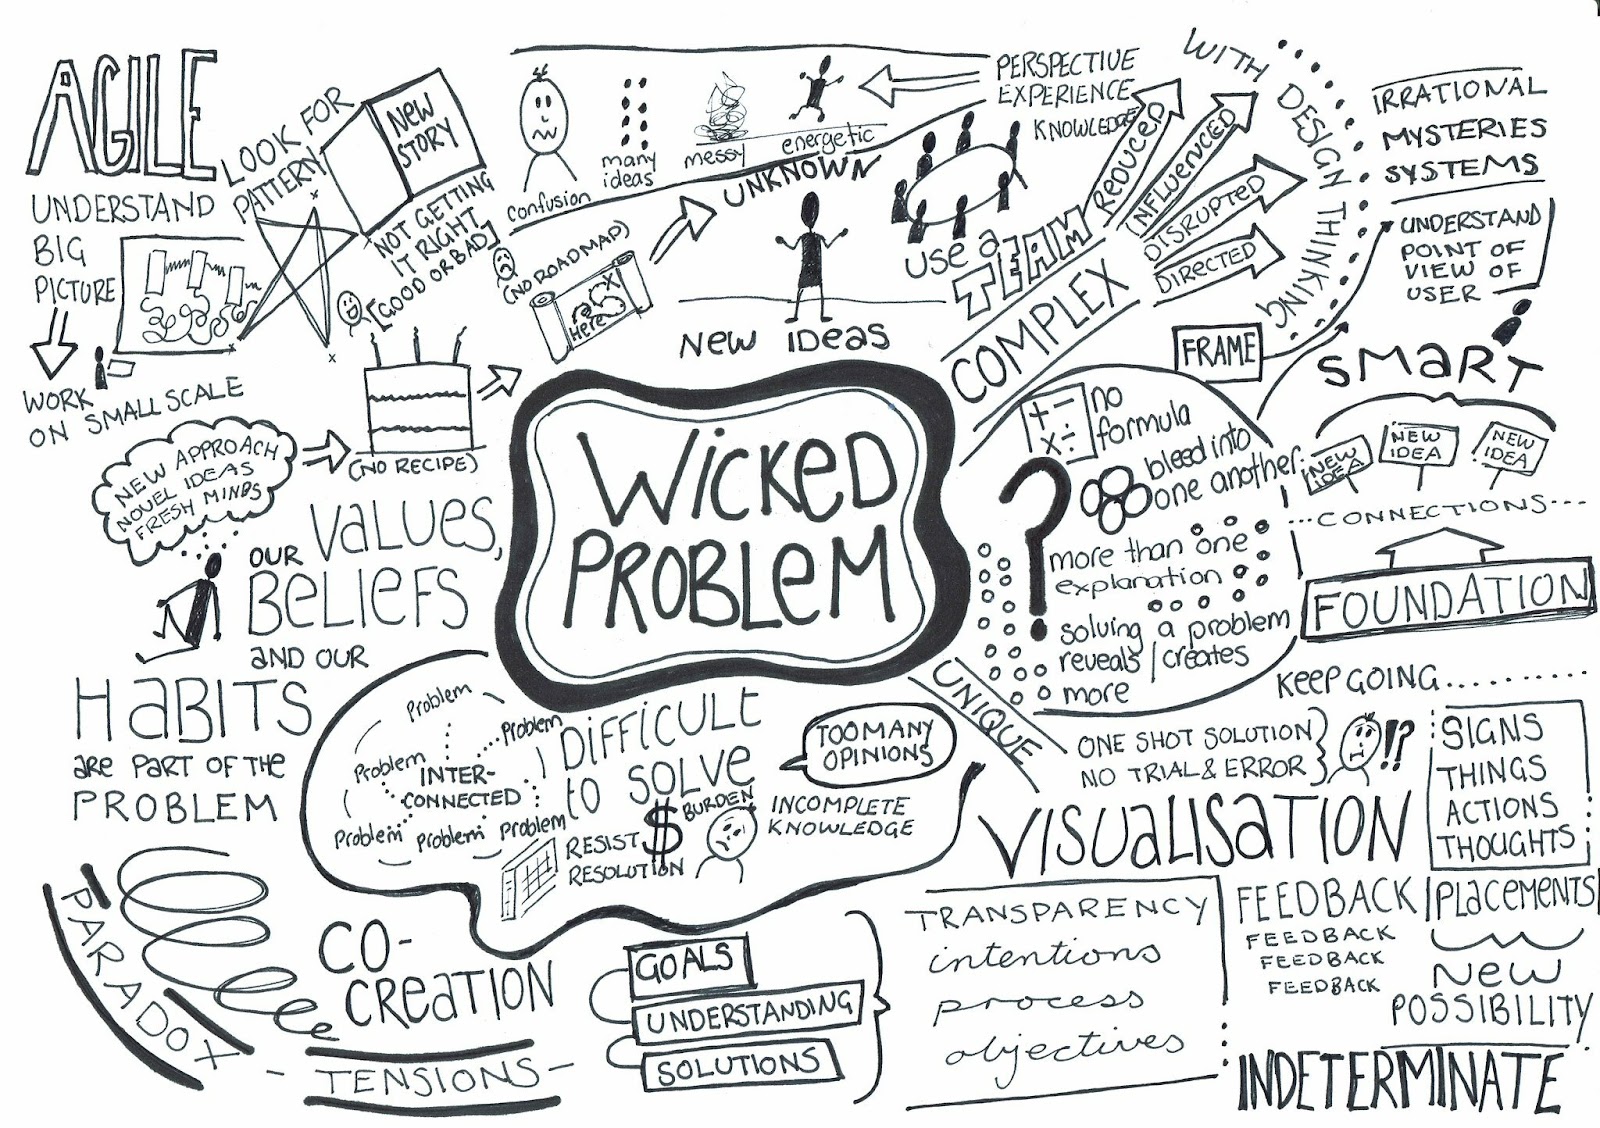 Sketchnote based on Richard Buchanan's wicked problems in design thinking.